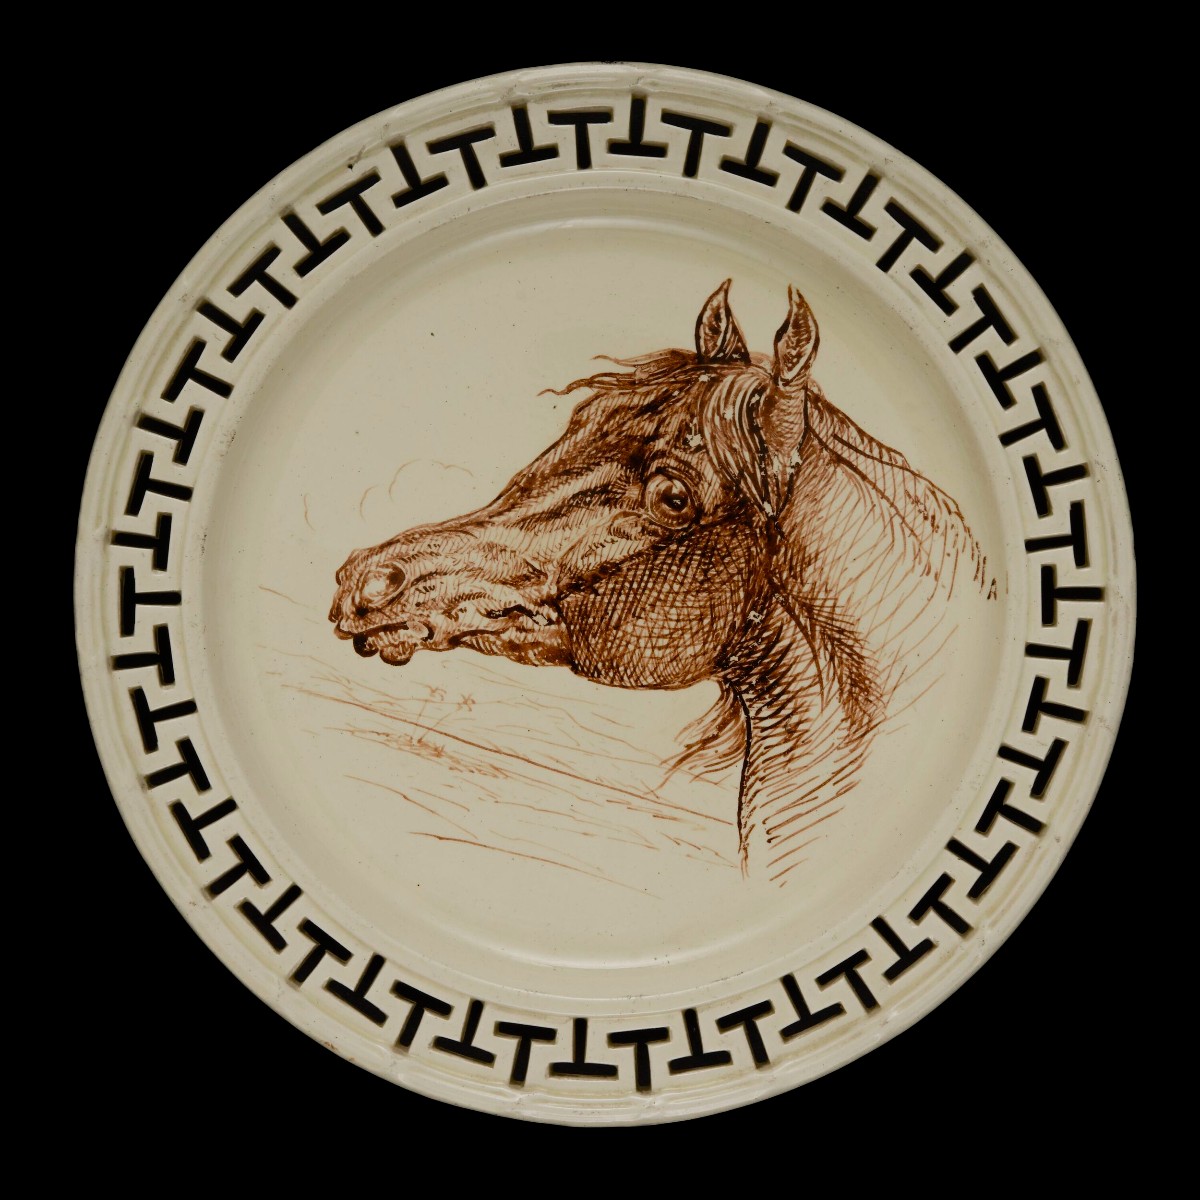 Let us introduce Paddy, Barbary and Arabian for this #FridayFinds. Designed by Colonel Henry Hope Crealock (1831 - 1891) in ca. 1880, the three Queen’s ware plates have a brown transfer printed decoration, and a repetitive 'T' shape piercing around the edge.